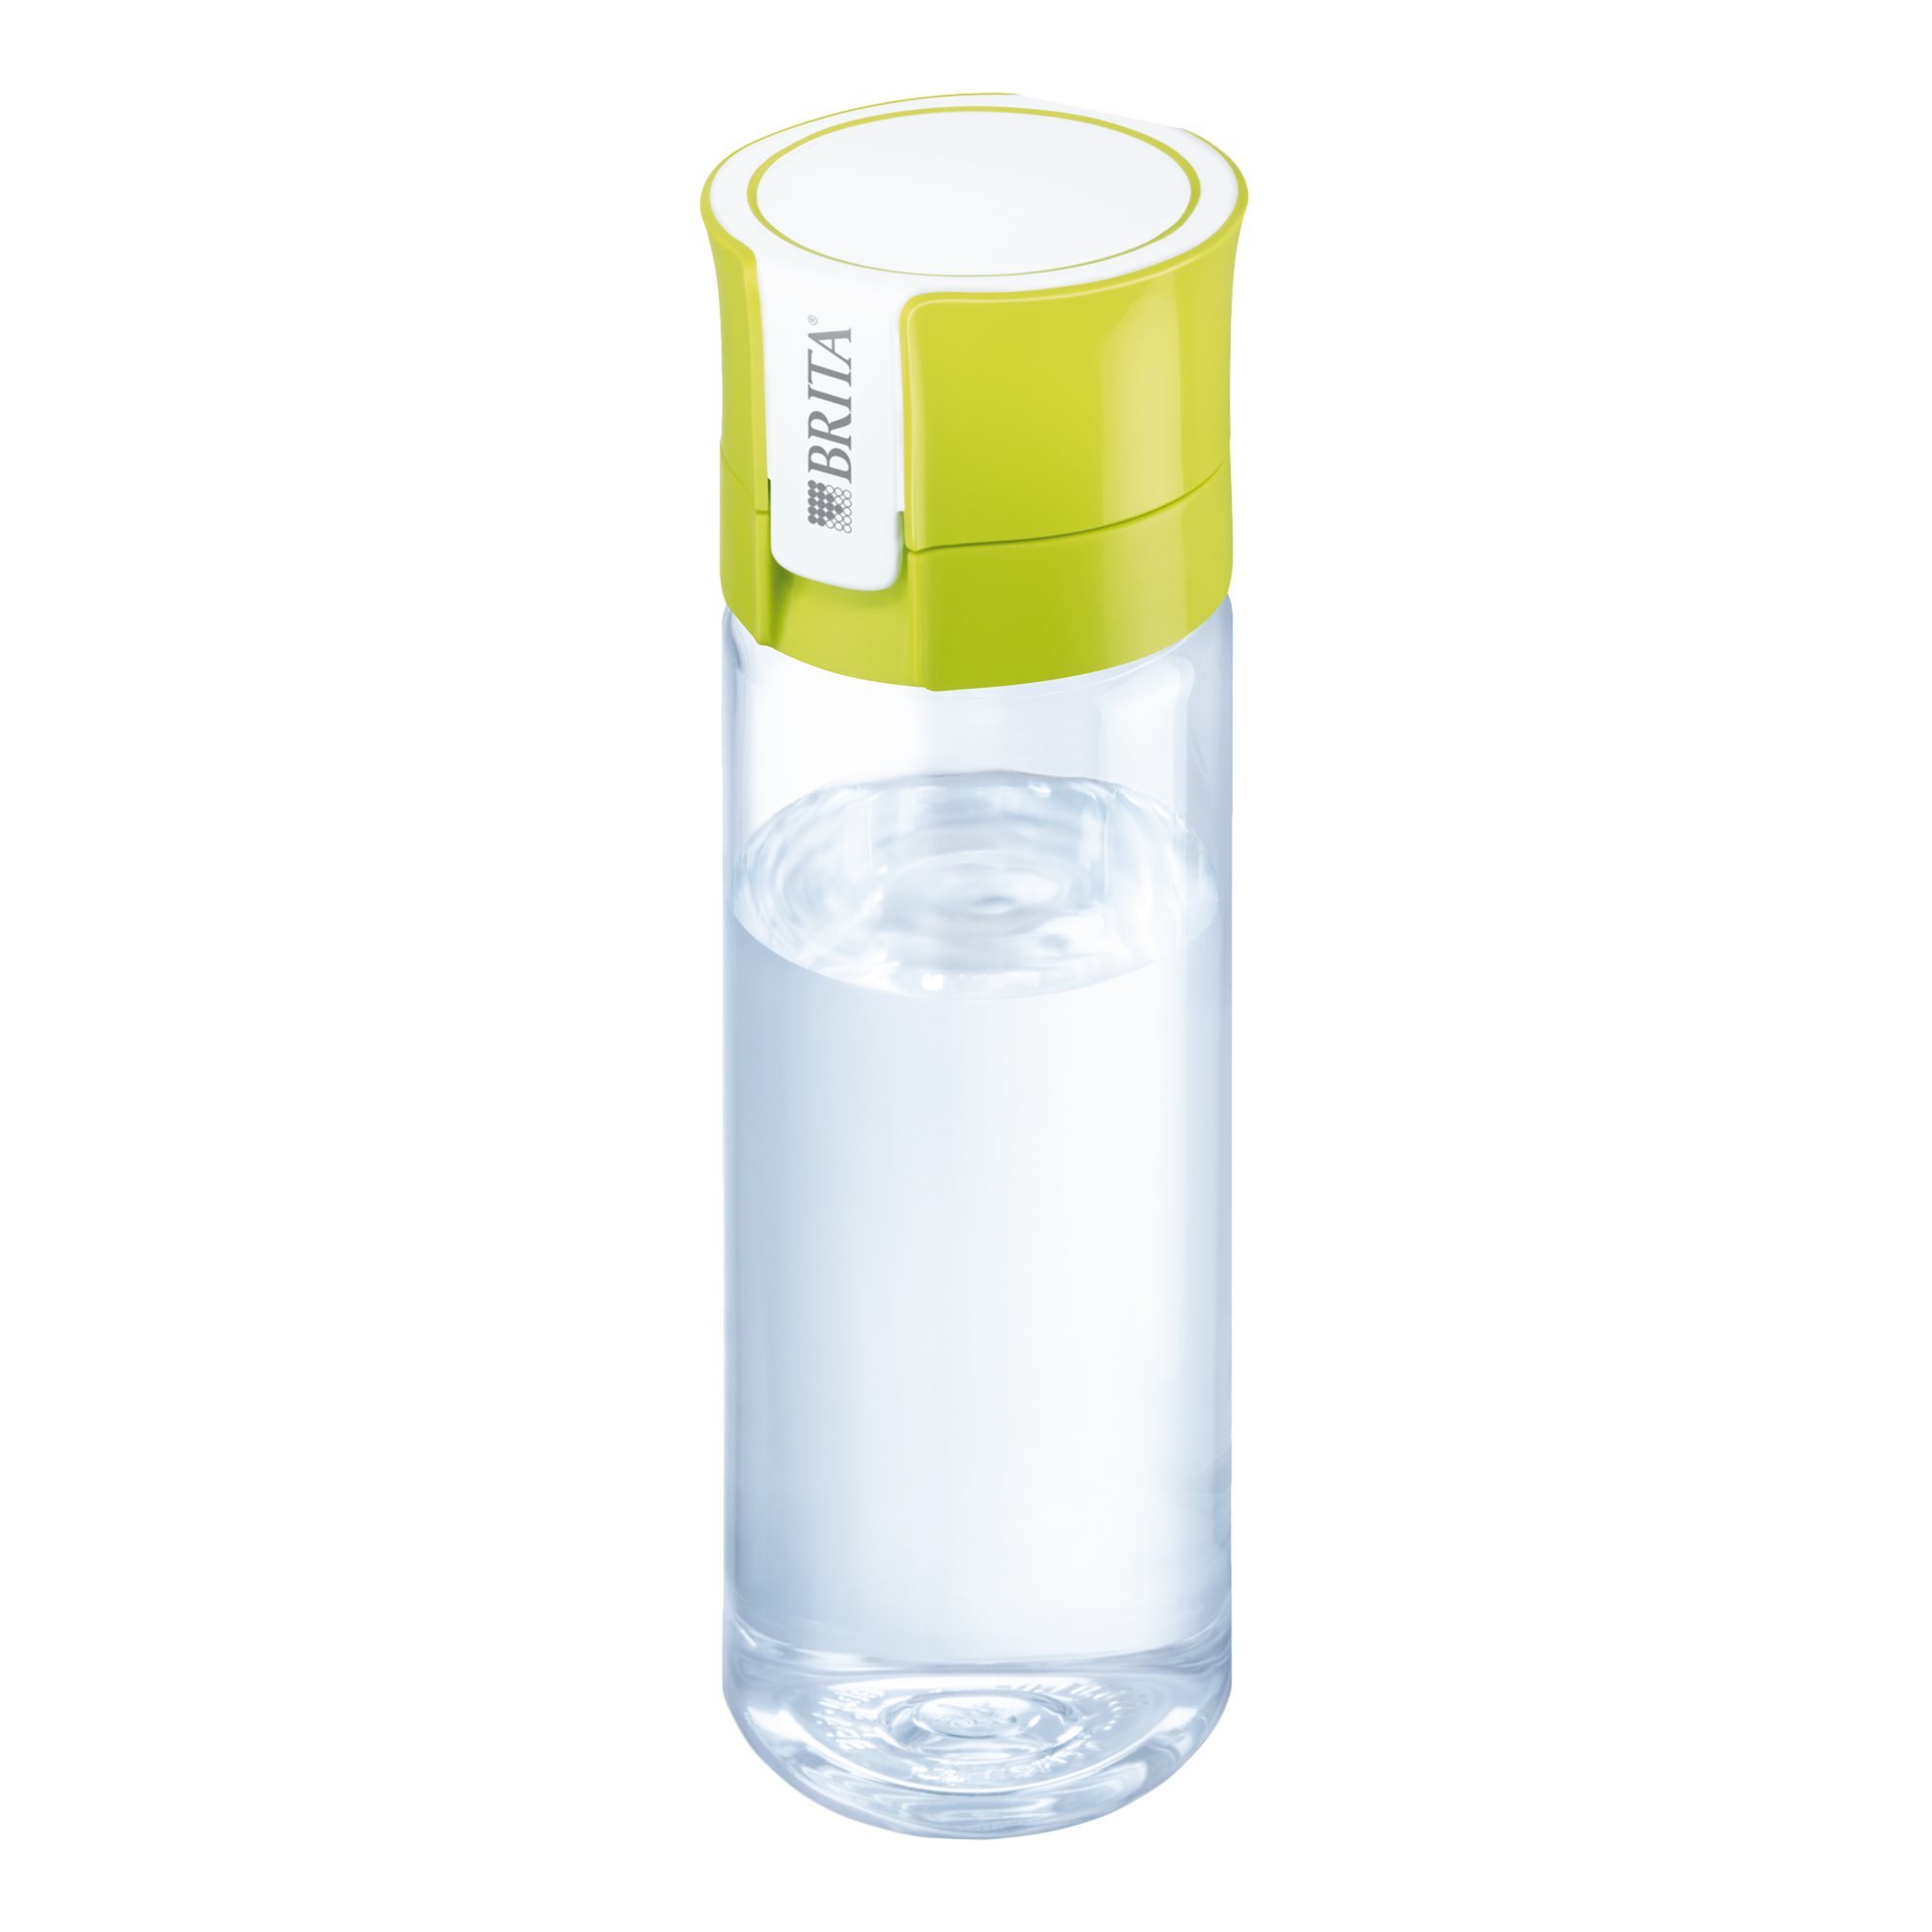 BRITA fill&go Active Water Filtration Bottle 0.6L with 1 MicroDisc Filter -  Lime